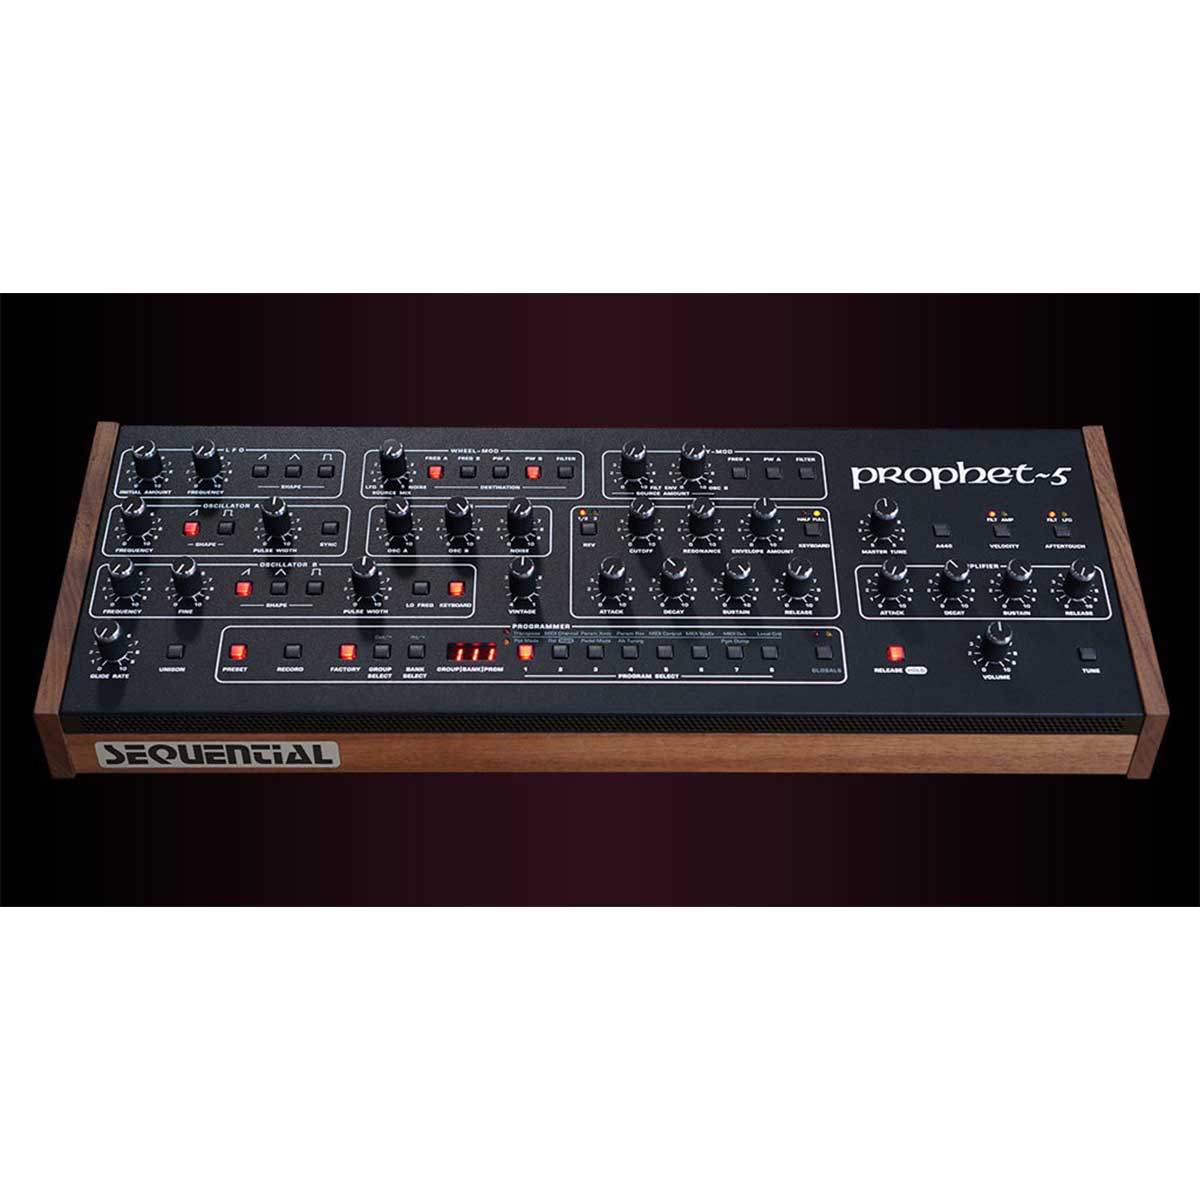 Sequential Prophet-5 Module Legendary 5-voice Analog Synth